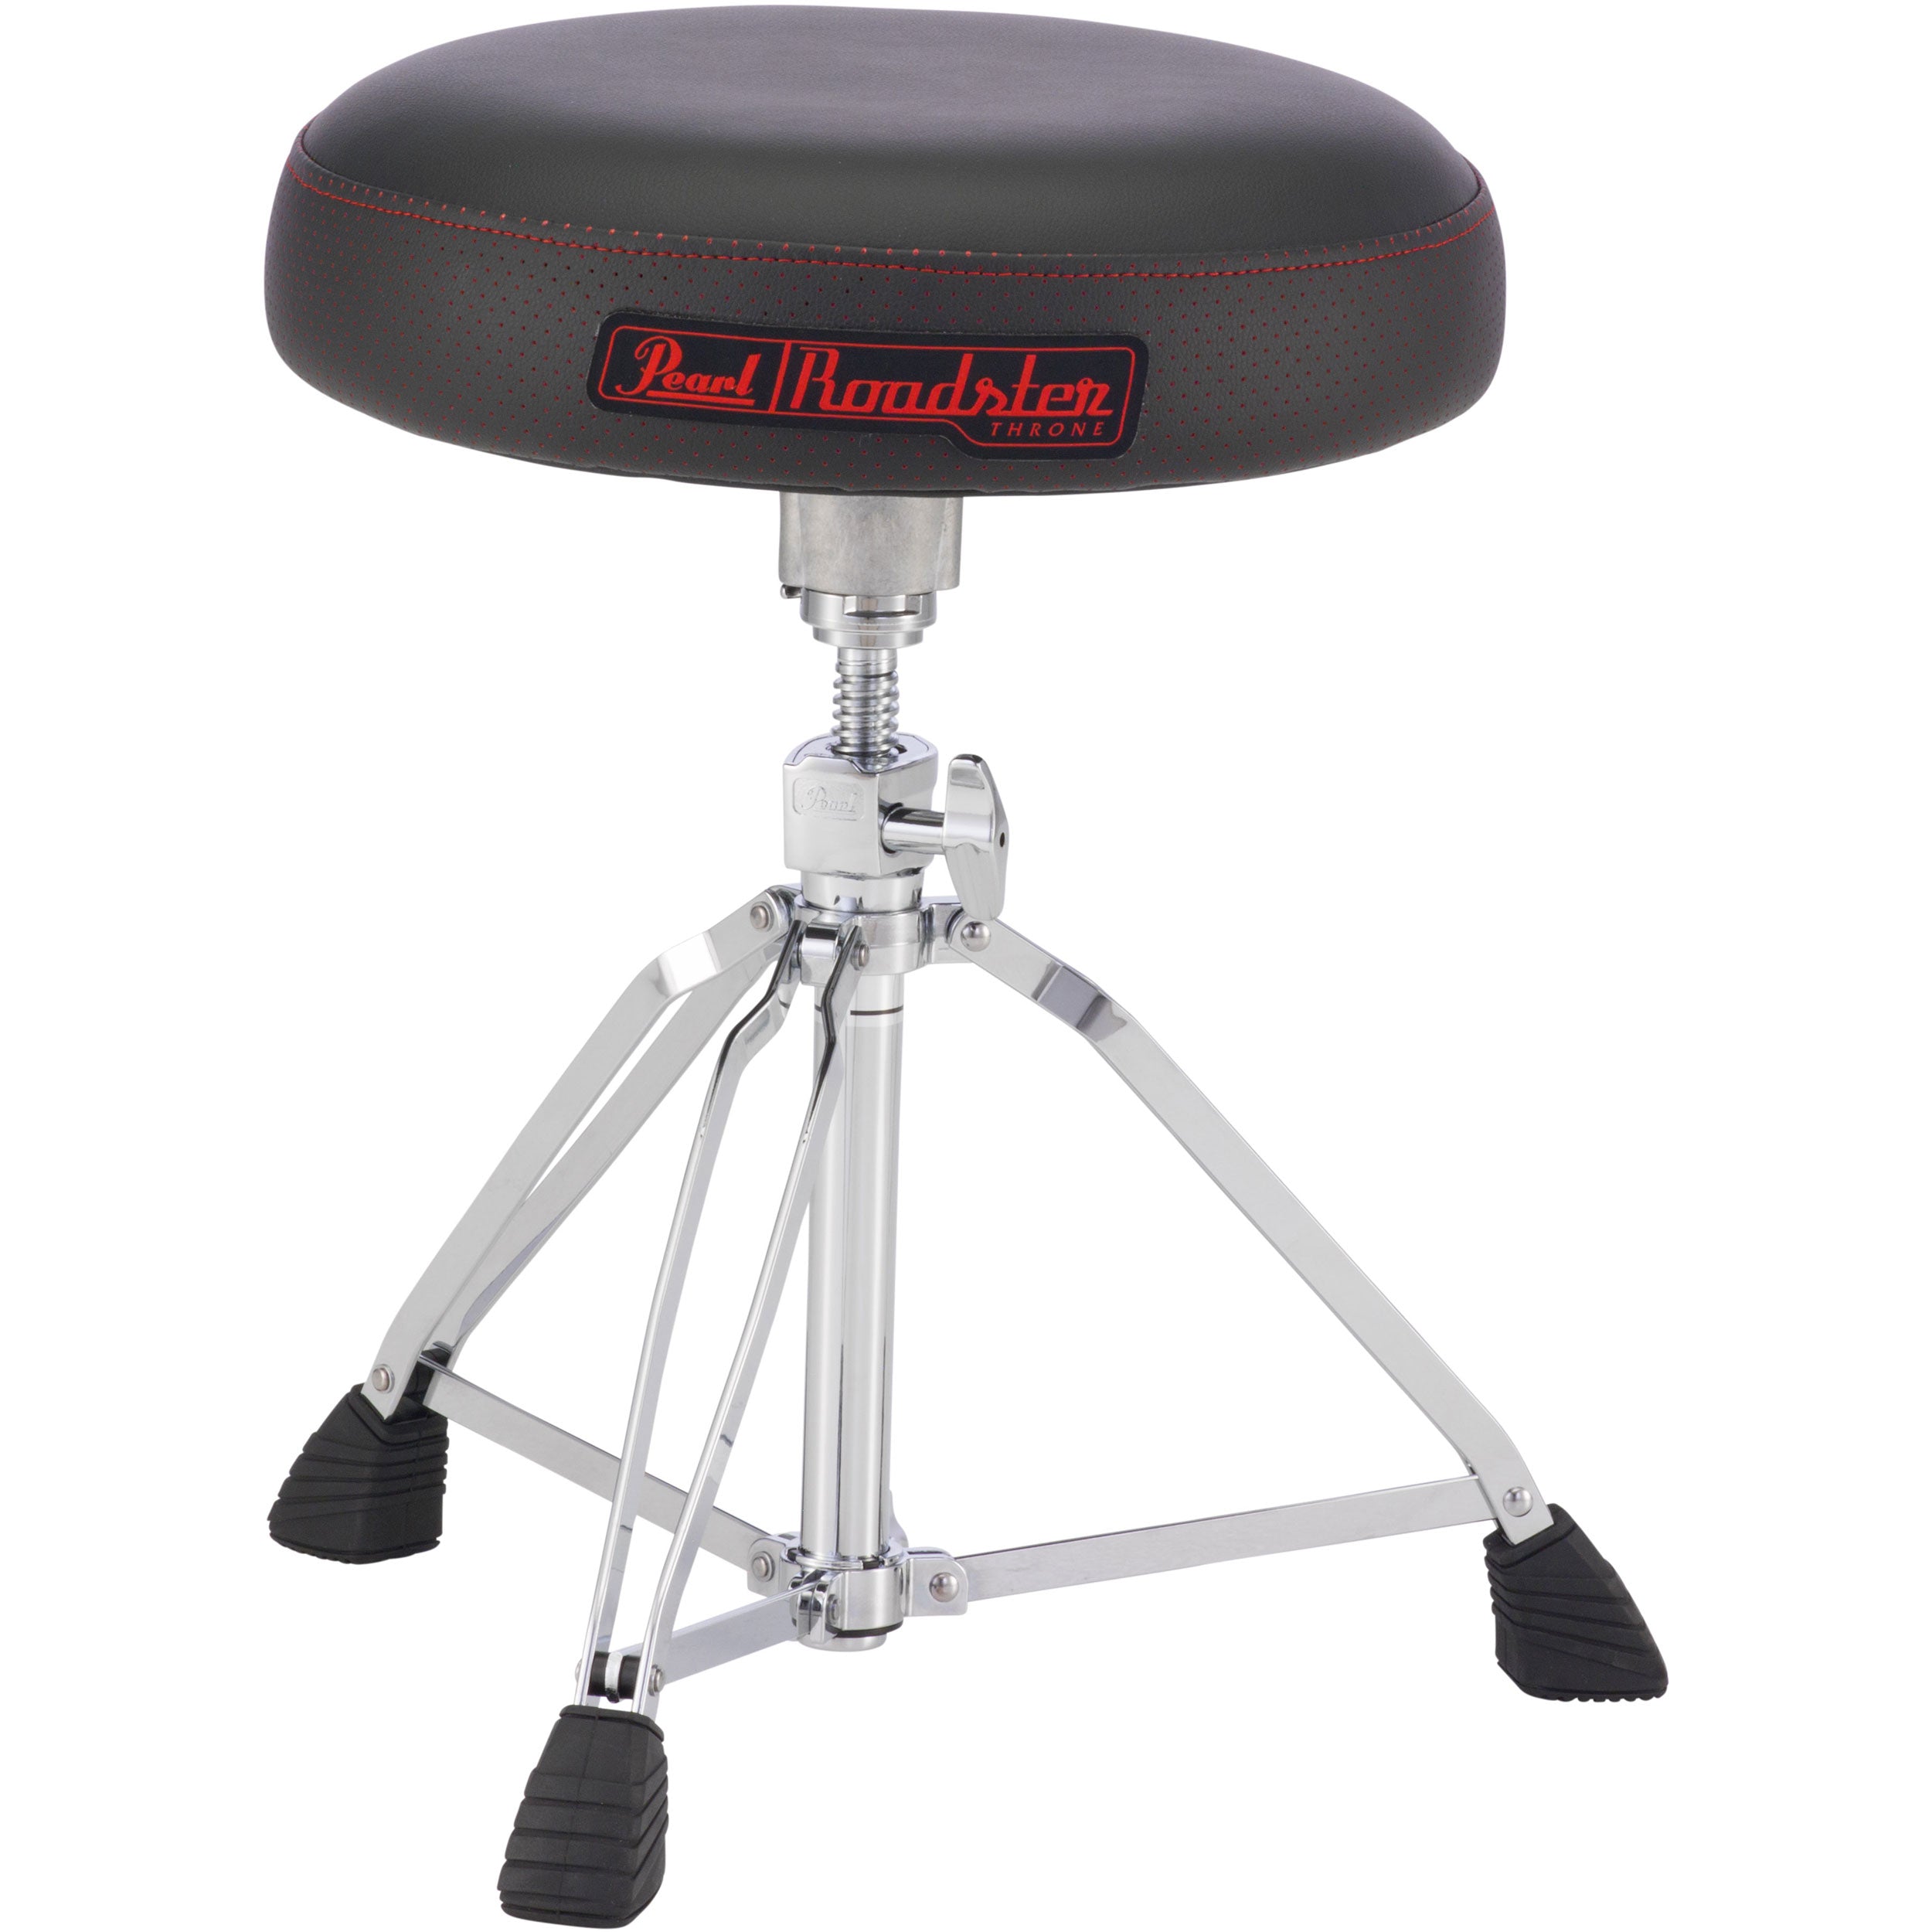 PEARL D1500 Roadster Round Drum Throne